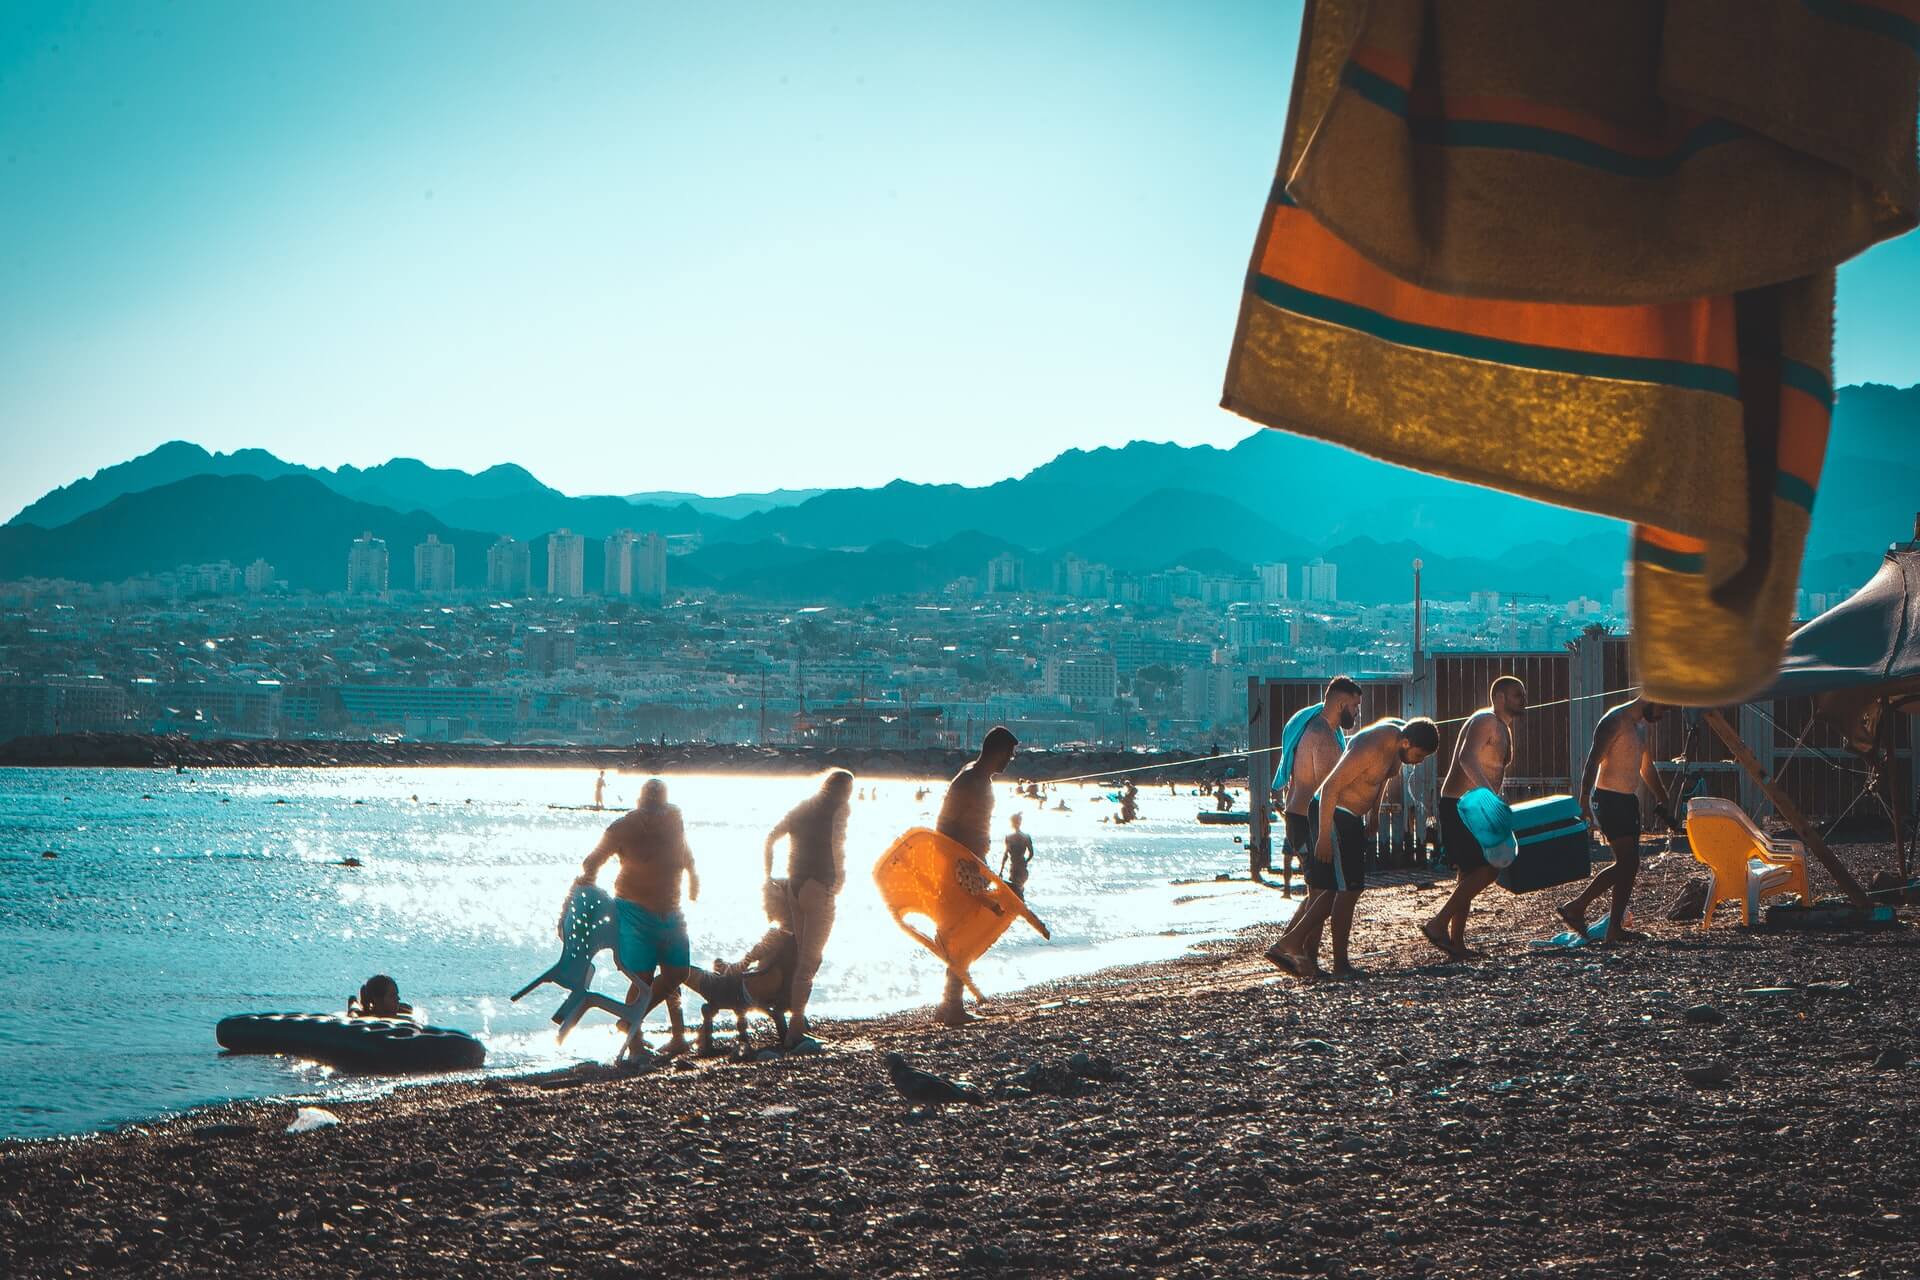 A crowd of tourists at a beach in Eilat